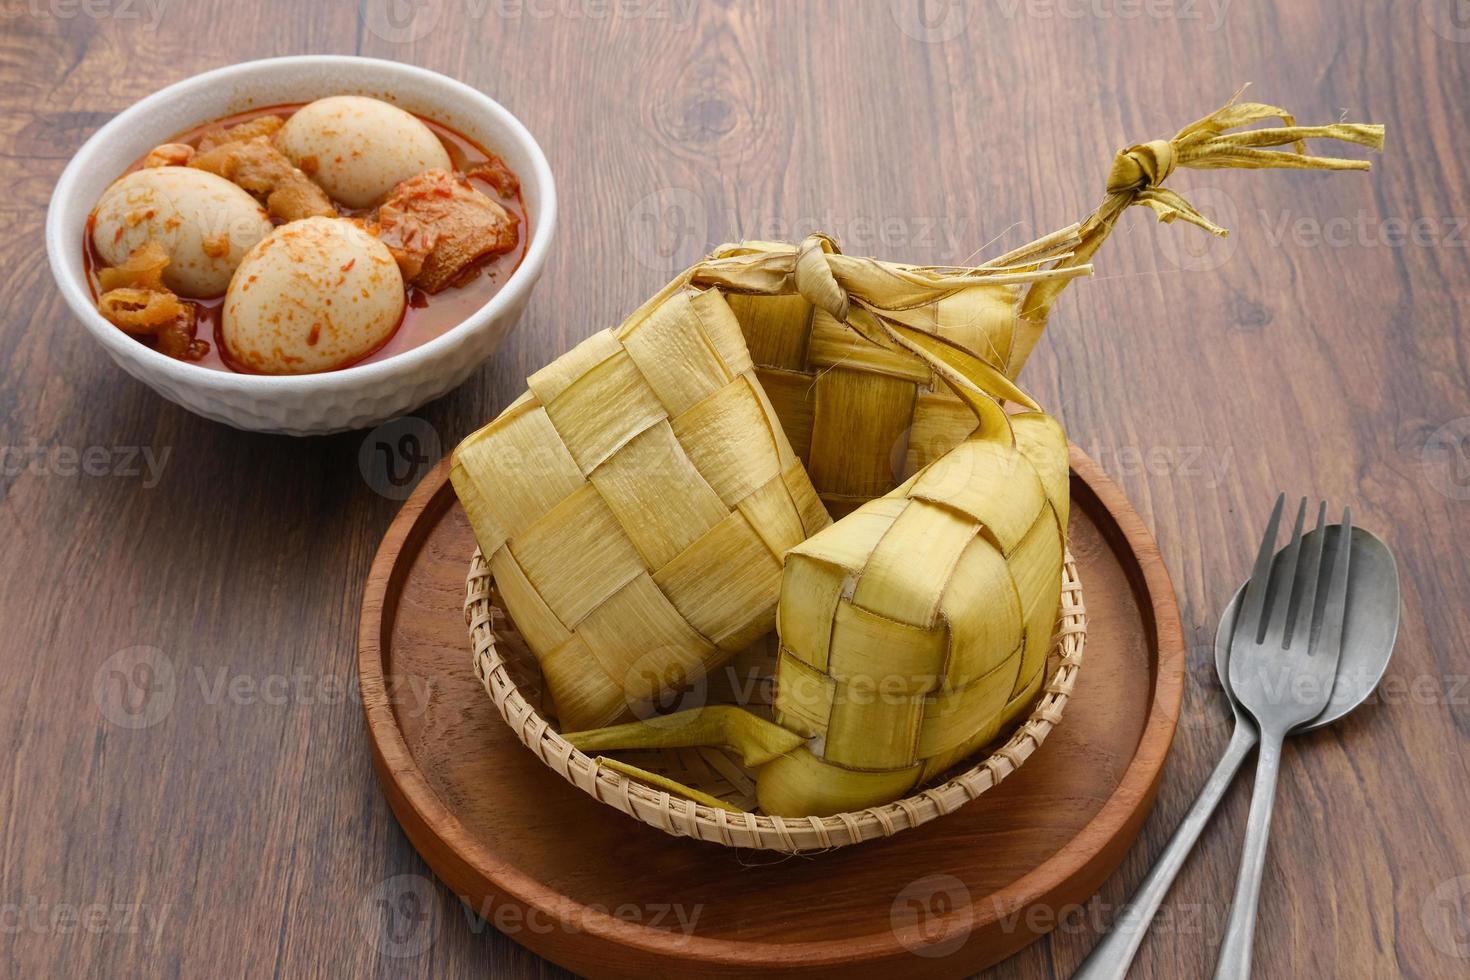 Ketupat, Ketupat or rice dumpling is a local delicacy during Eid al-Fitr. Natural rice casing made from young coconut leaves for cooking rice.  It is very popular during Eid al-Fitr in Indonesia. photo